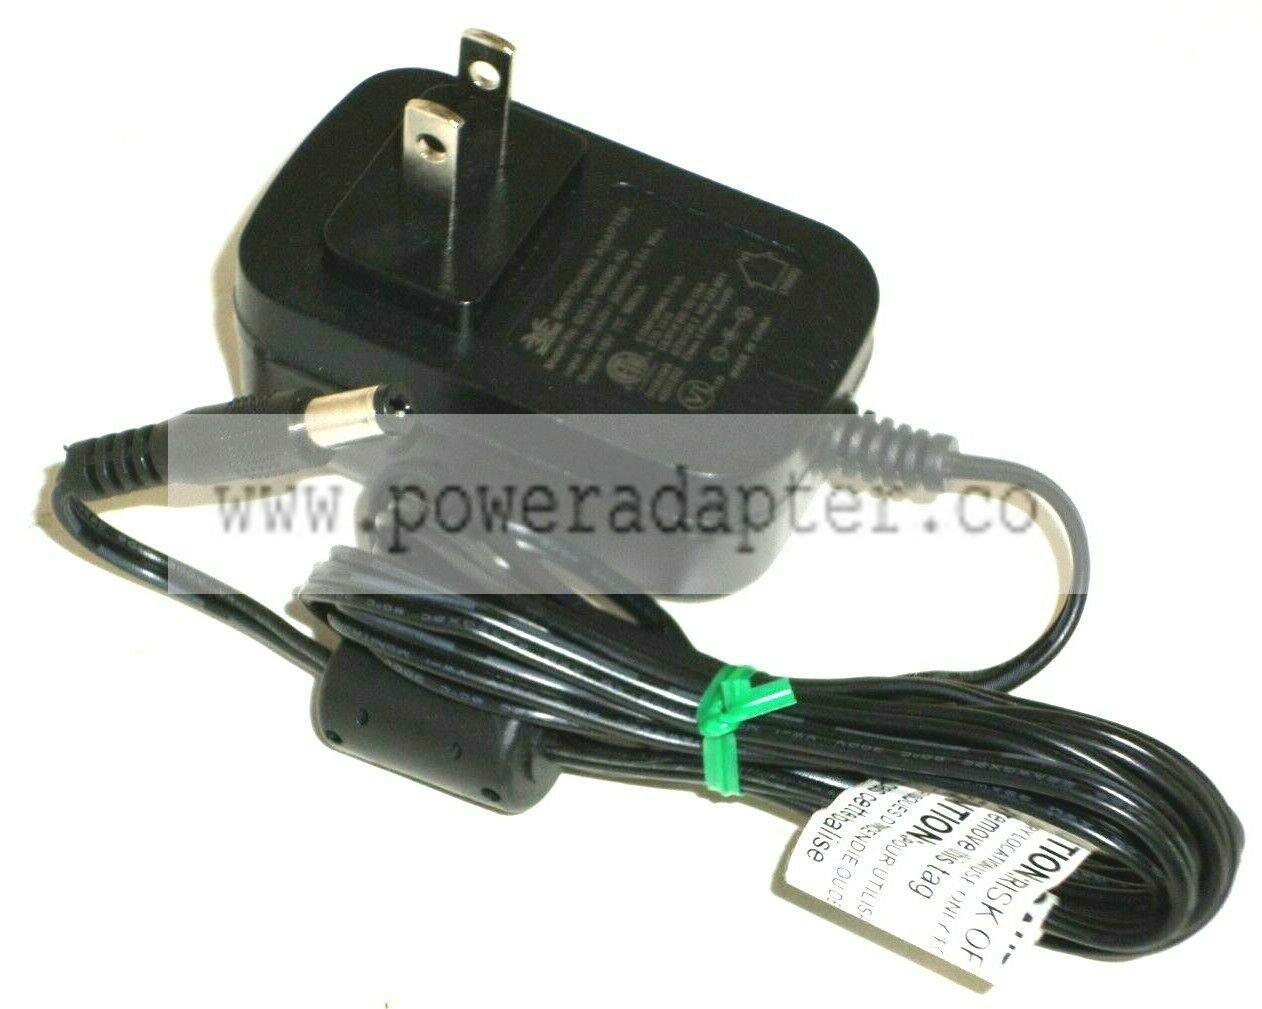 3YE Switching Power Supply AC Adapter 19V 500mA P/N GQ12-190060-AU Type: AC/AC Adapter Output Voltage: 19 V MPN: GQ1